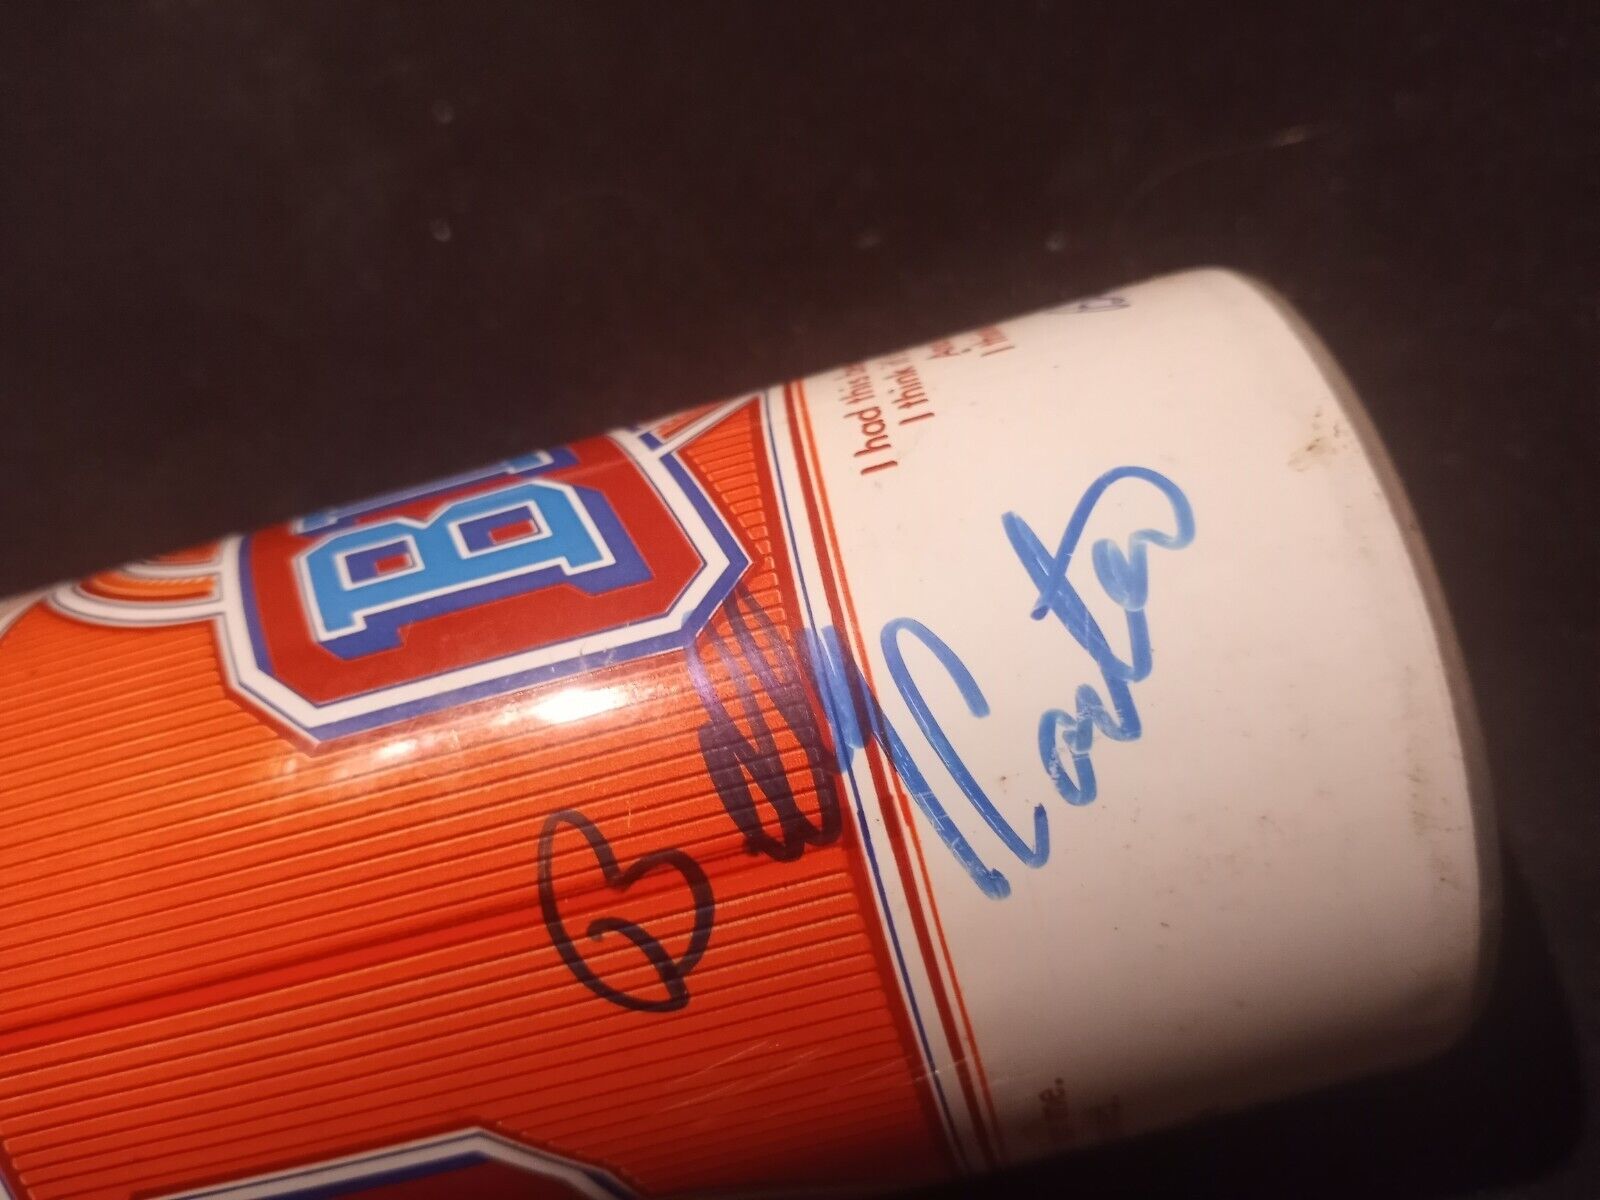 Super Rare Billy Beer Can Signed By Billy Carter I\'ve Had This Since I Was A Kid